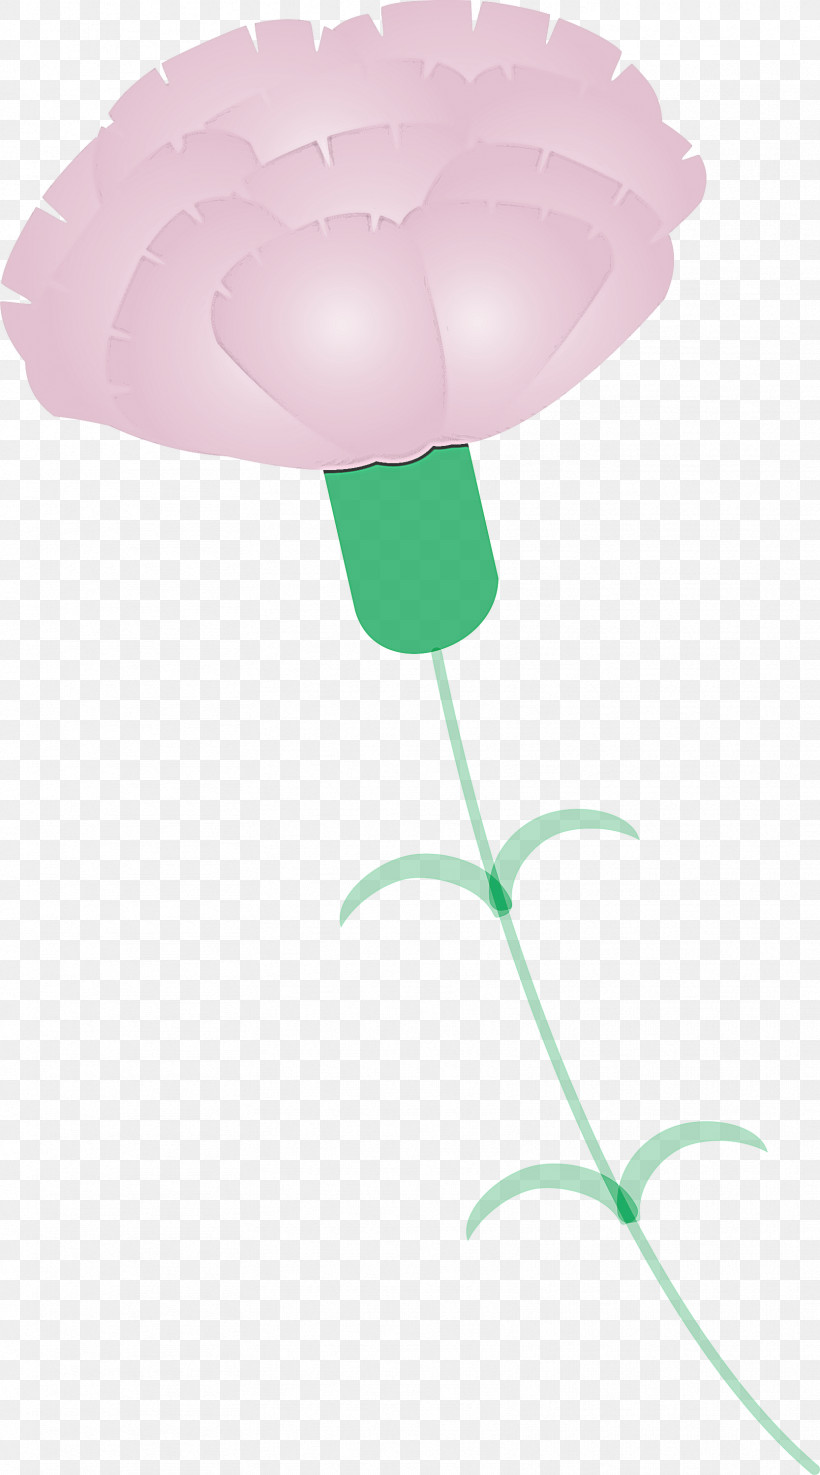 Mothers Day Carnation Mothers Day Flower, PNG, 1667x3000px, Mothers Day Carnation, Flower, Mothers Day Flower, Pink, Plant Download Free